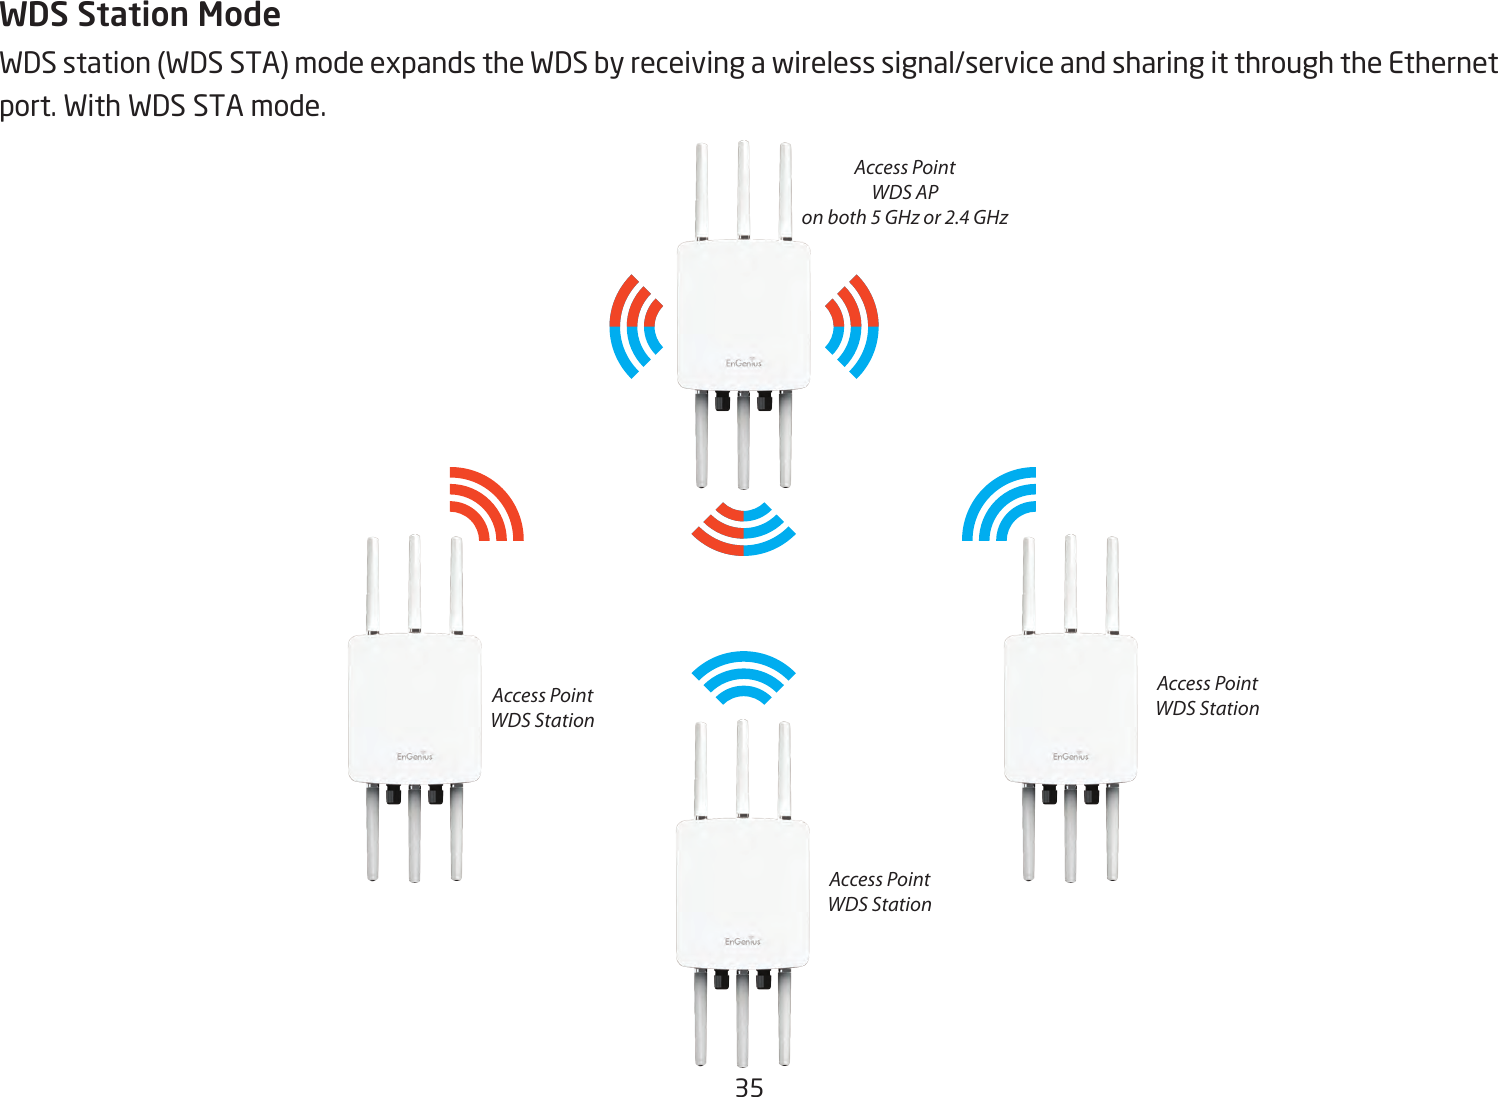 35WDS Station ModeWDS station (WDS STA) mode expands the WDS by receiving a wireless signal/service and sharing it through the Ethernet port. With WDS STA mode. Access PointWDS APon both 5 GHz or 2.4 GHzAccess PointWDS StationAccess PointWDS StationAccess PointWDS Station